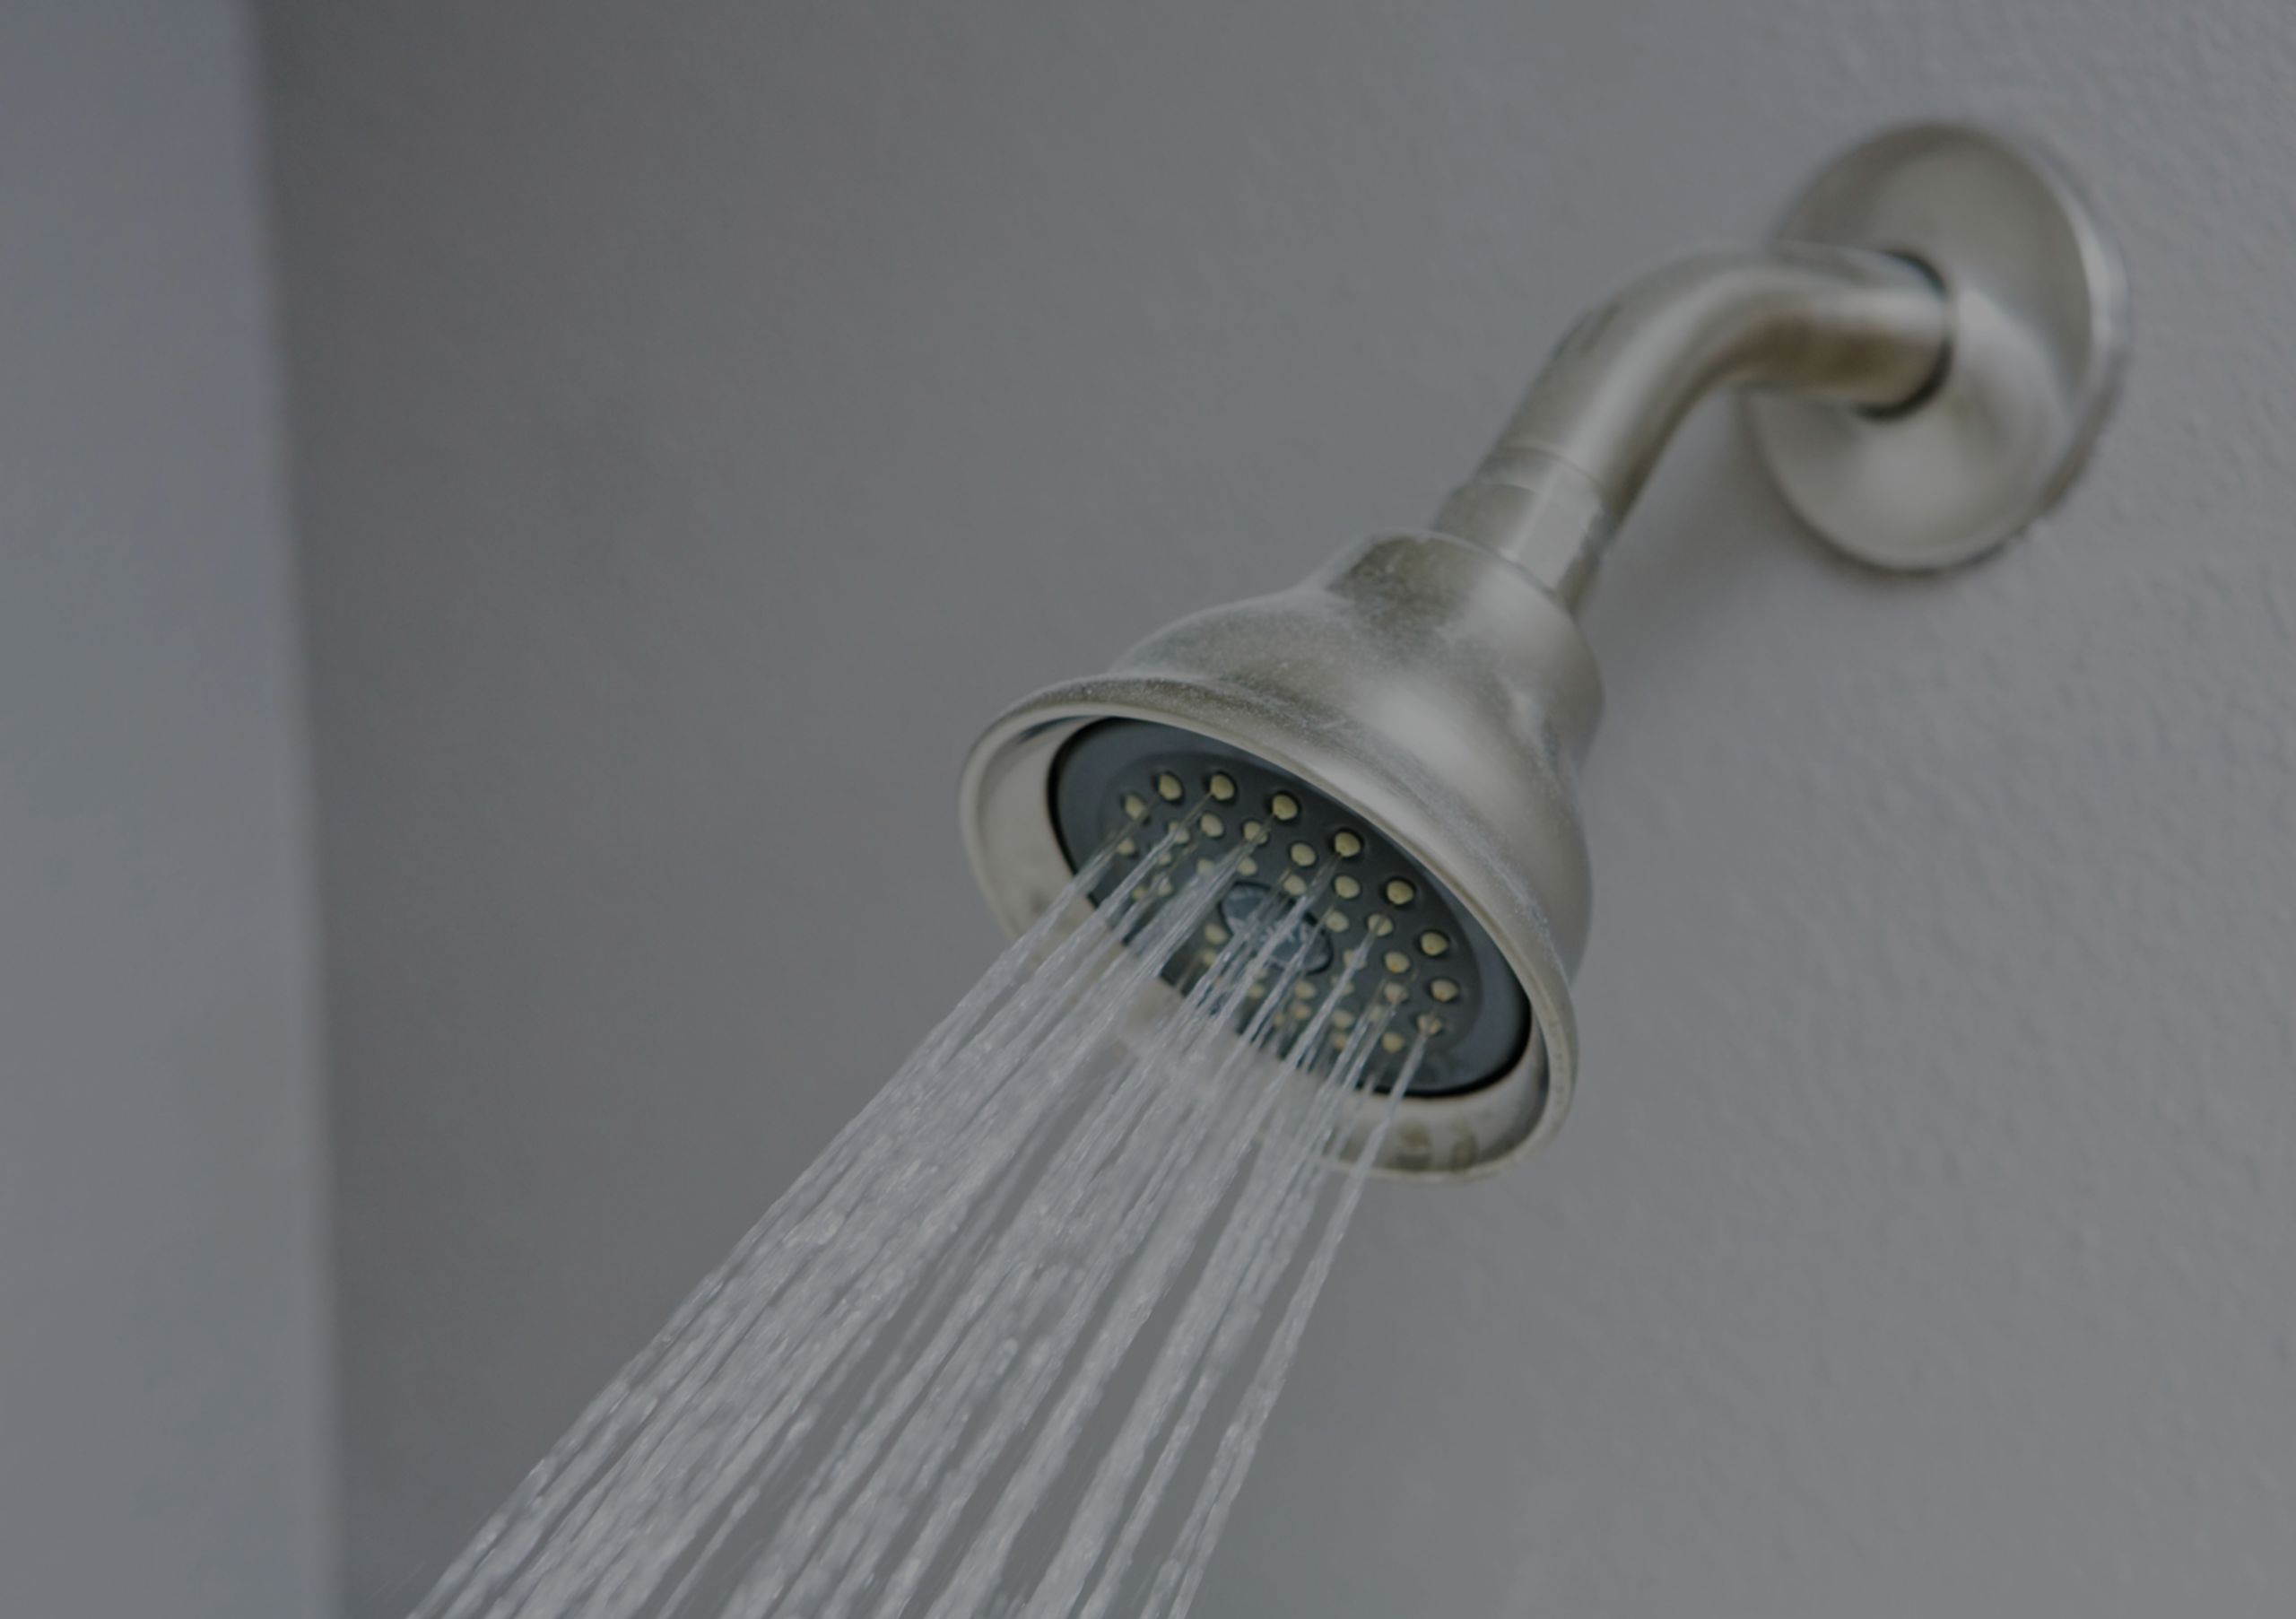 HOW TO SAVE WATER (AND MONEY!) AT HOME